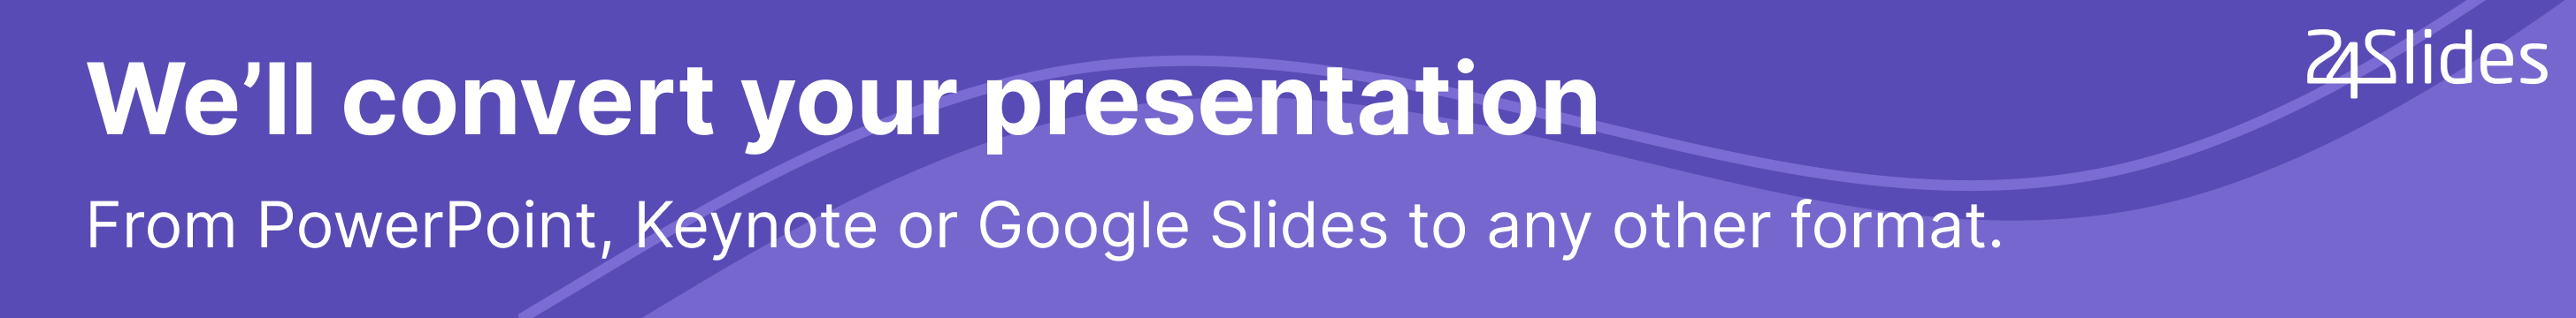 how to show notes in presentation mode powerpoint